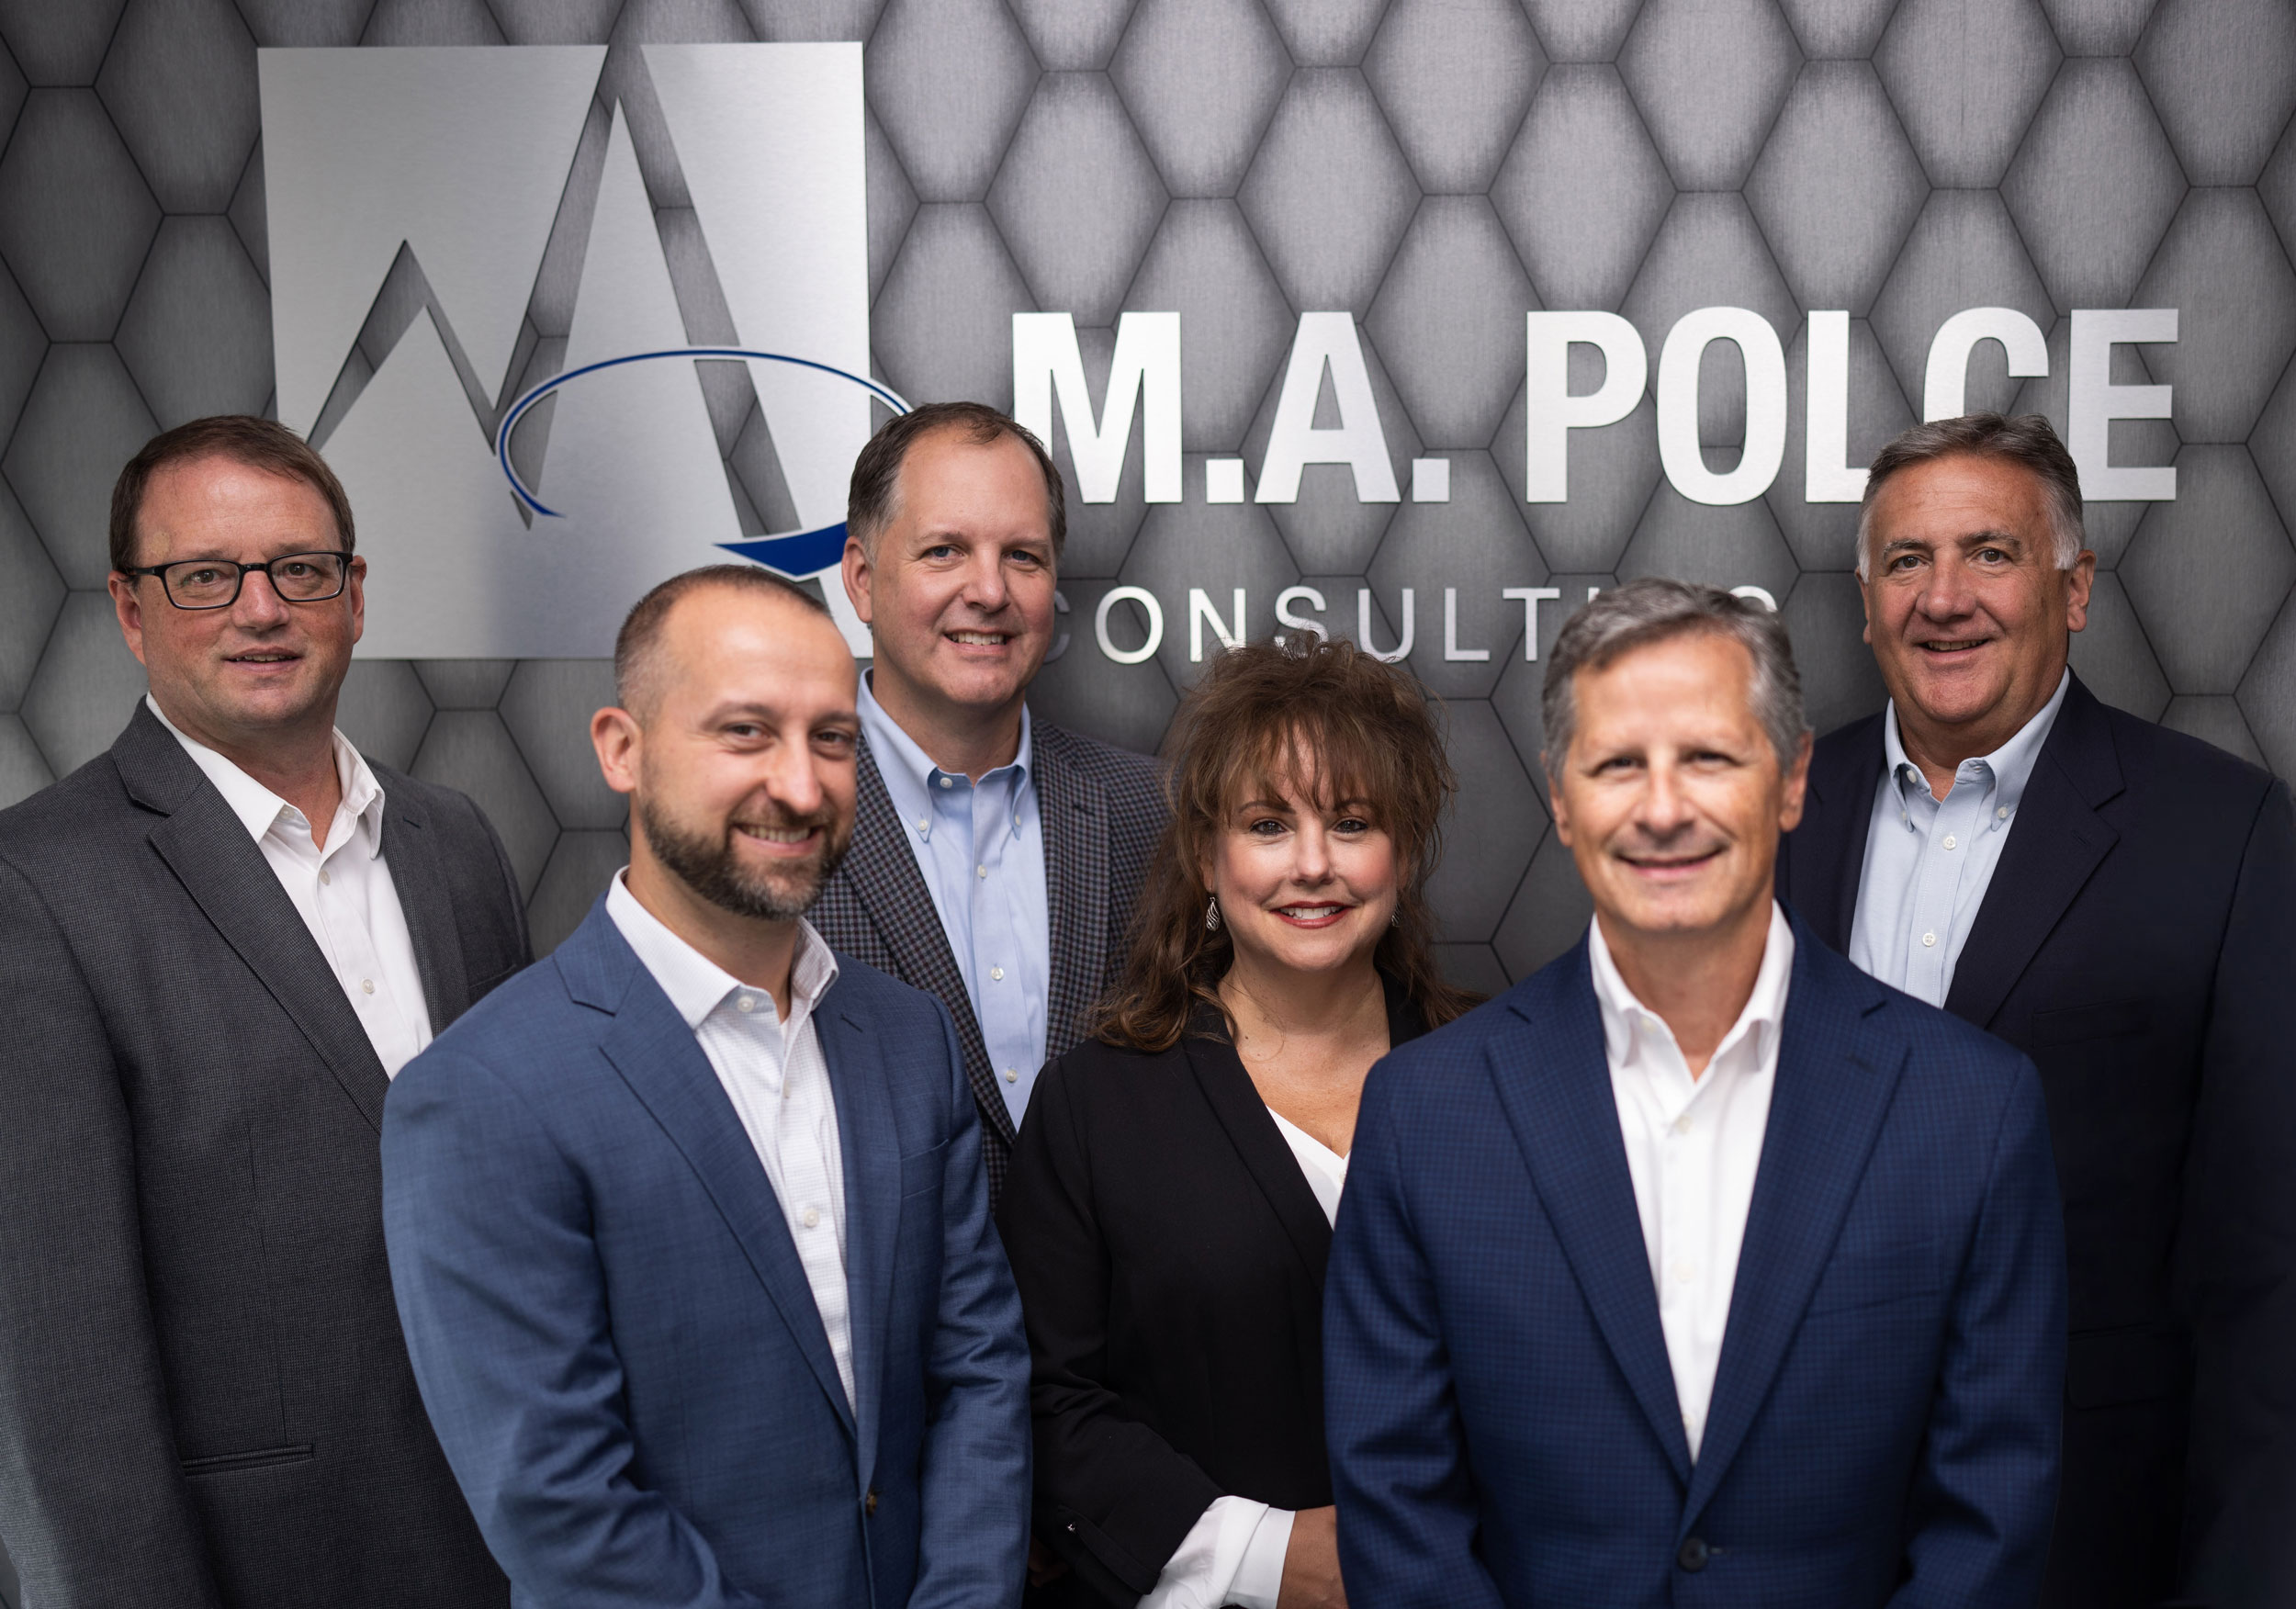 Leadership team photo for M.A. Polce, an MSP and MSSP company that delivers IT and cybersecurity services to businesses and organizations in Central and Western New York